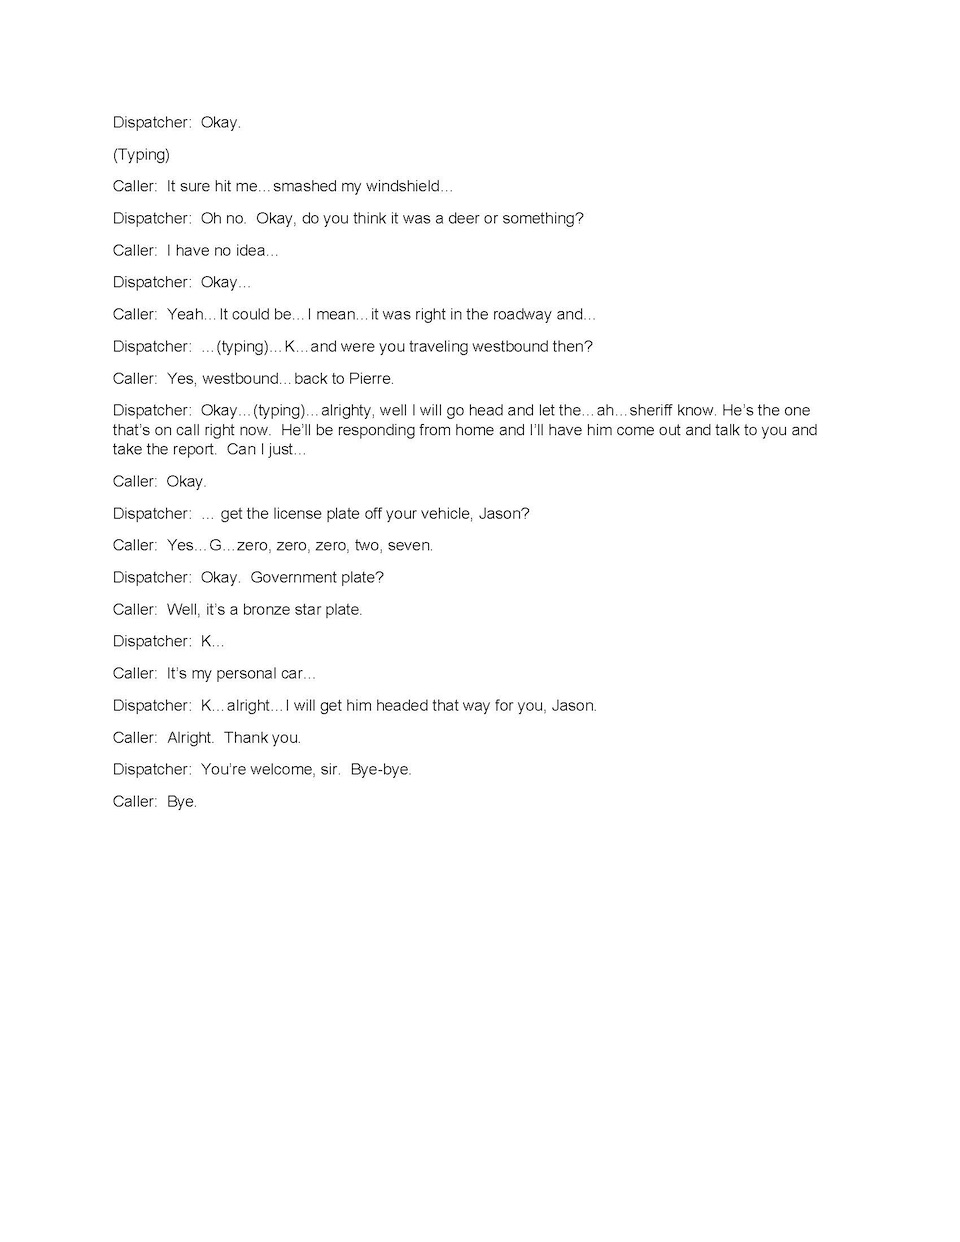 Transcript of 9-1-1- call placed by Jason Ravnsborg, 2020.09.12, transcribed by Dawn Hill, SD Dept. of Public Safety, posted to KNBN, 2020.10.13, p. 2.